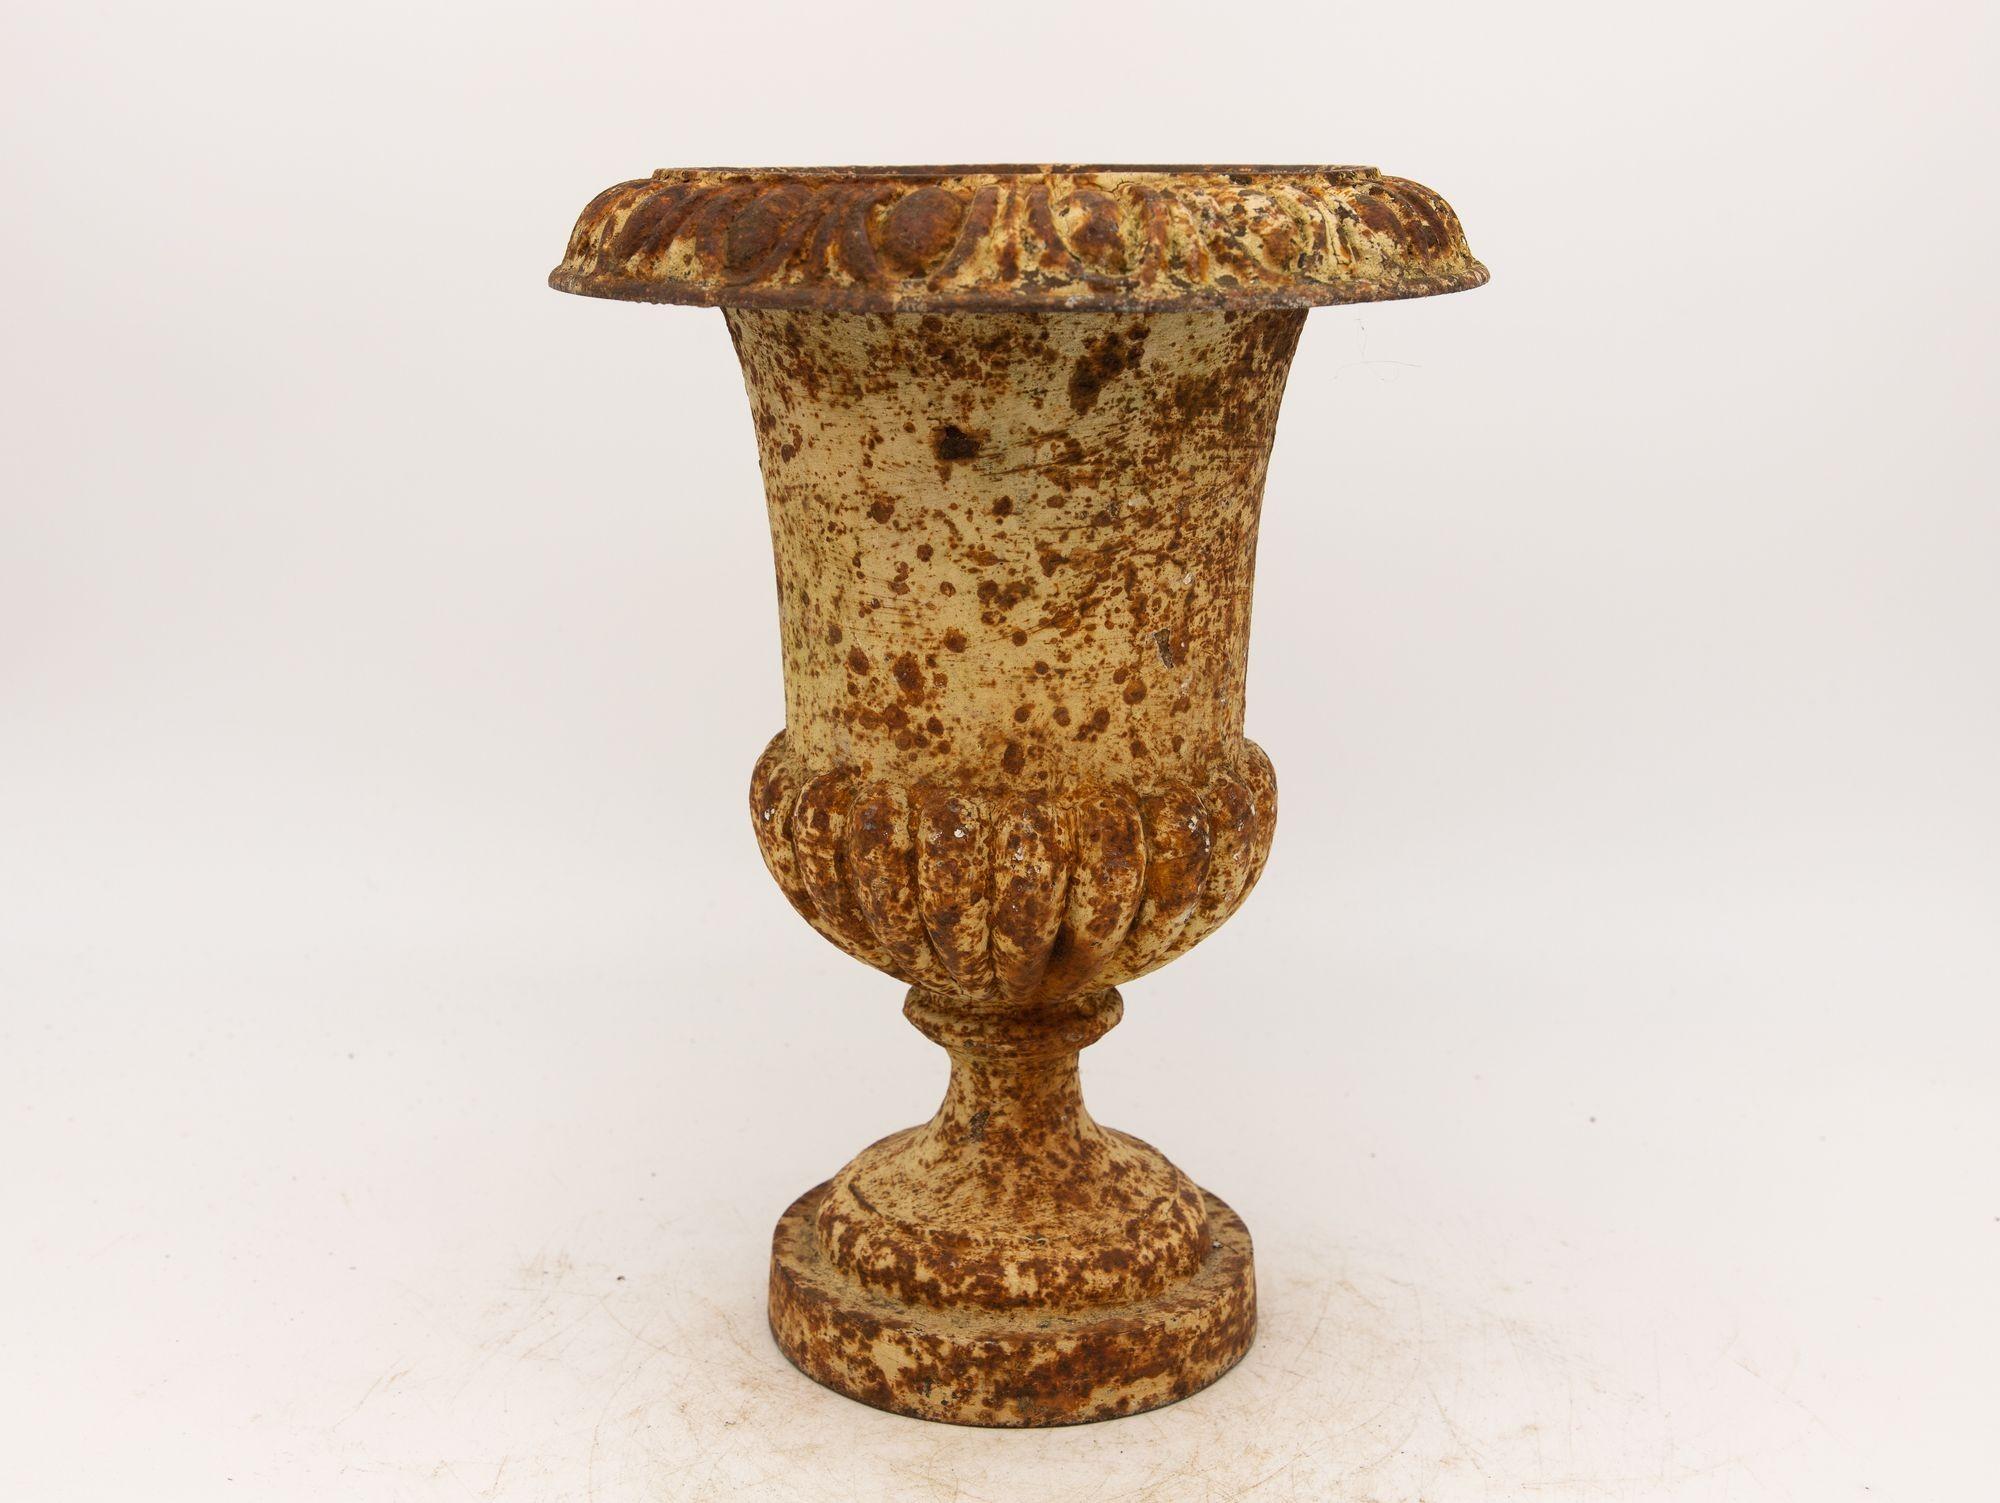 This cast iron urn is a beautiful example of French early 20th-century design. It has a timeless quality that makes it a perfect addition to any garden or outdoor space. The urn is made of solid cast iron, which gives it substantial weight and